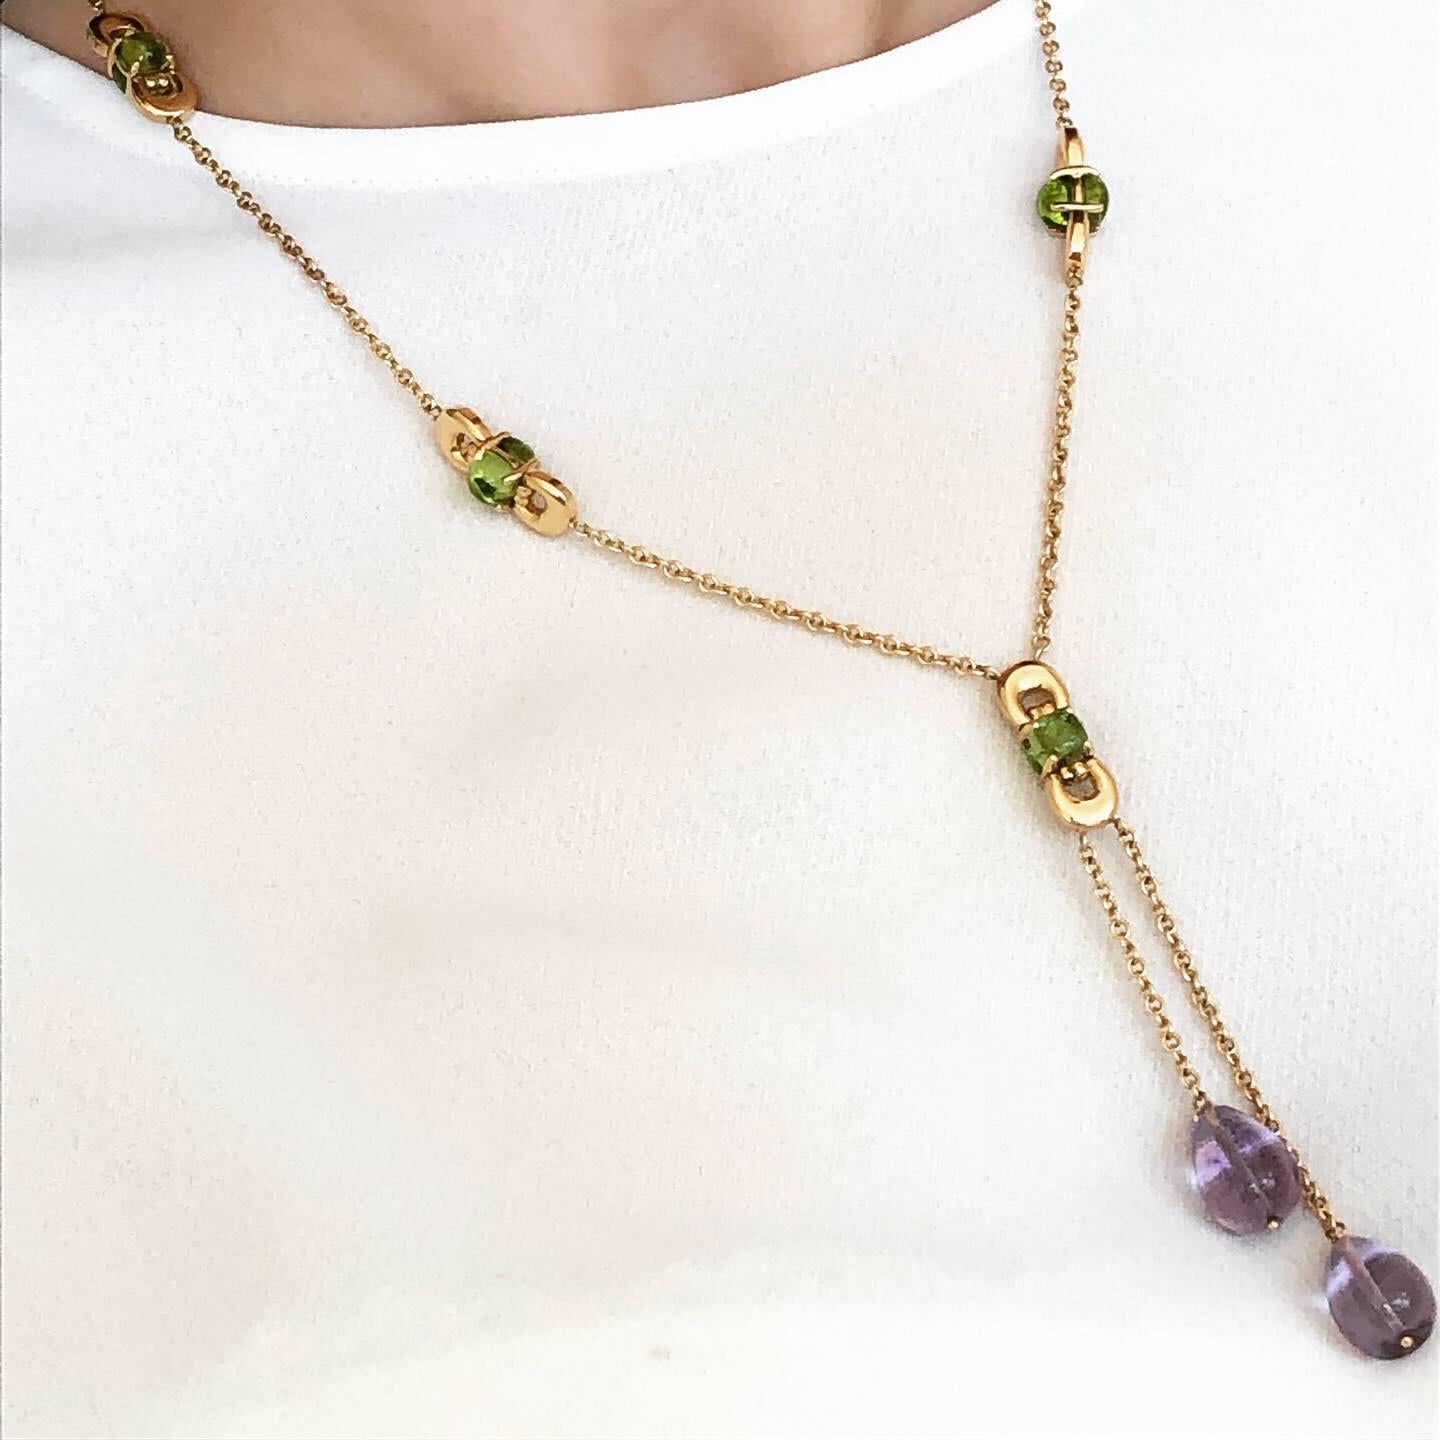 Contemporary Sassi Fine Jewellery Secret of Berenice Lariat Necklace Amethyst Drops & Peridot For Sale